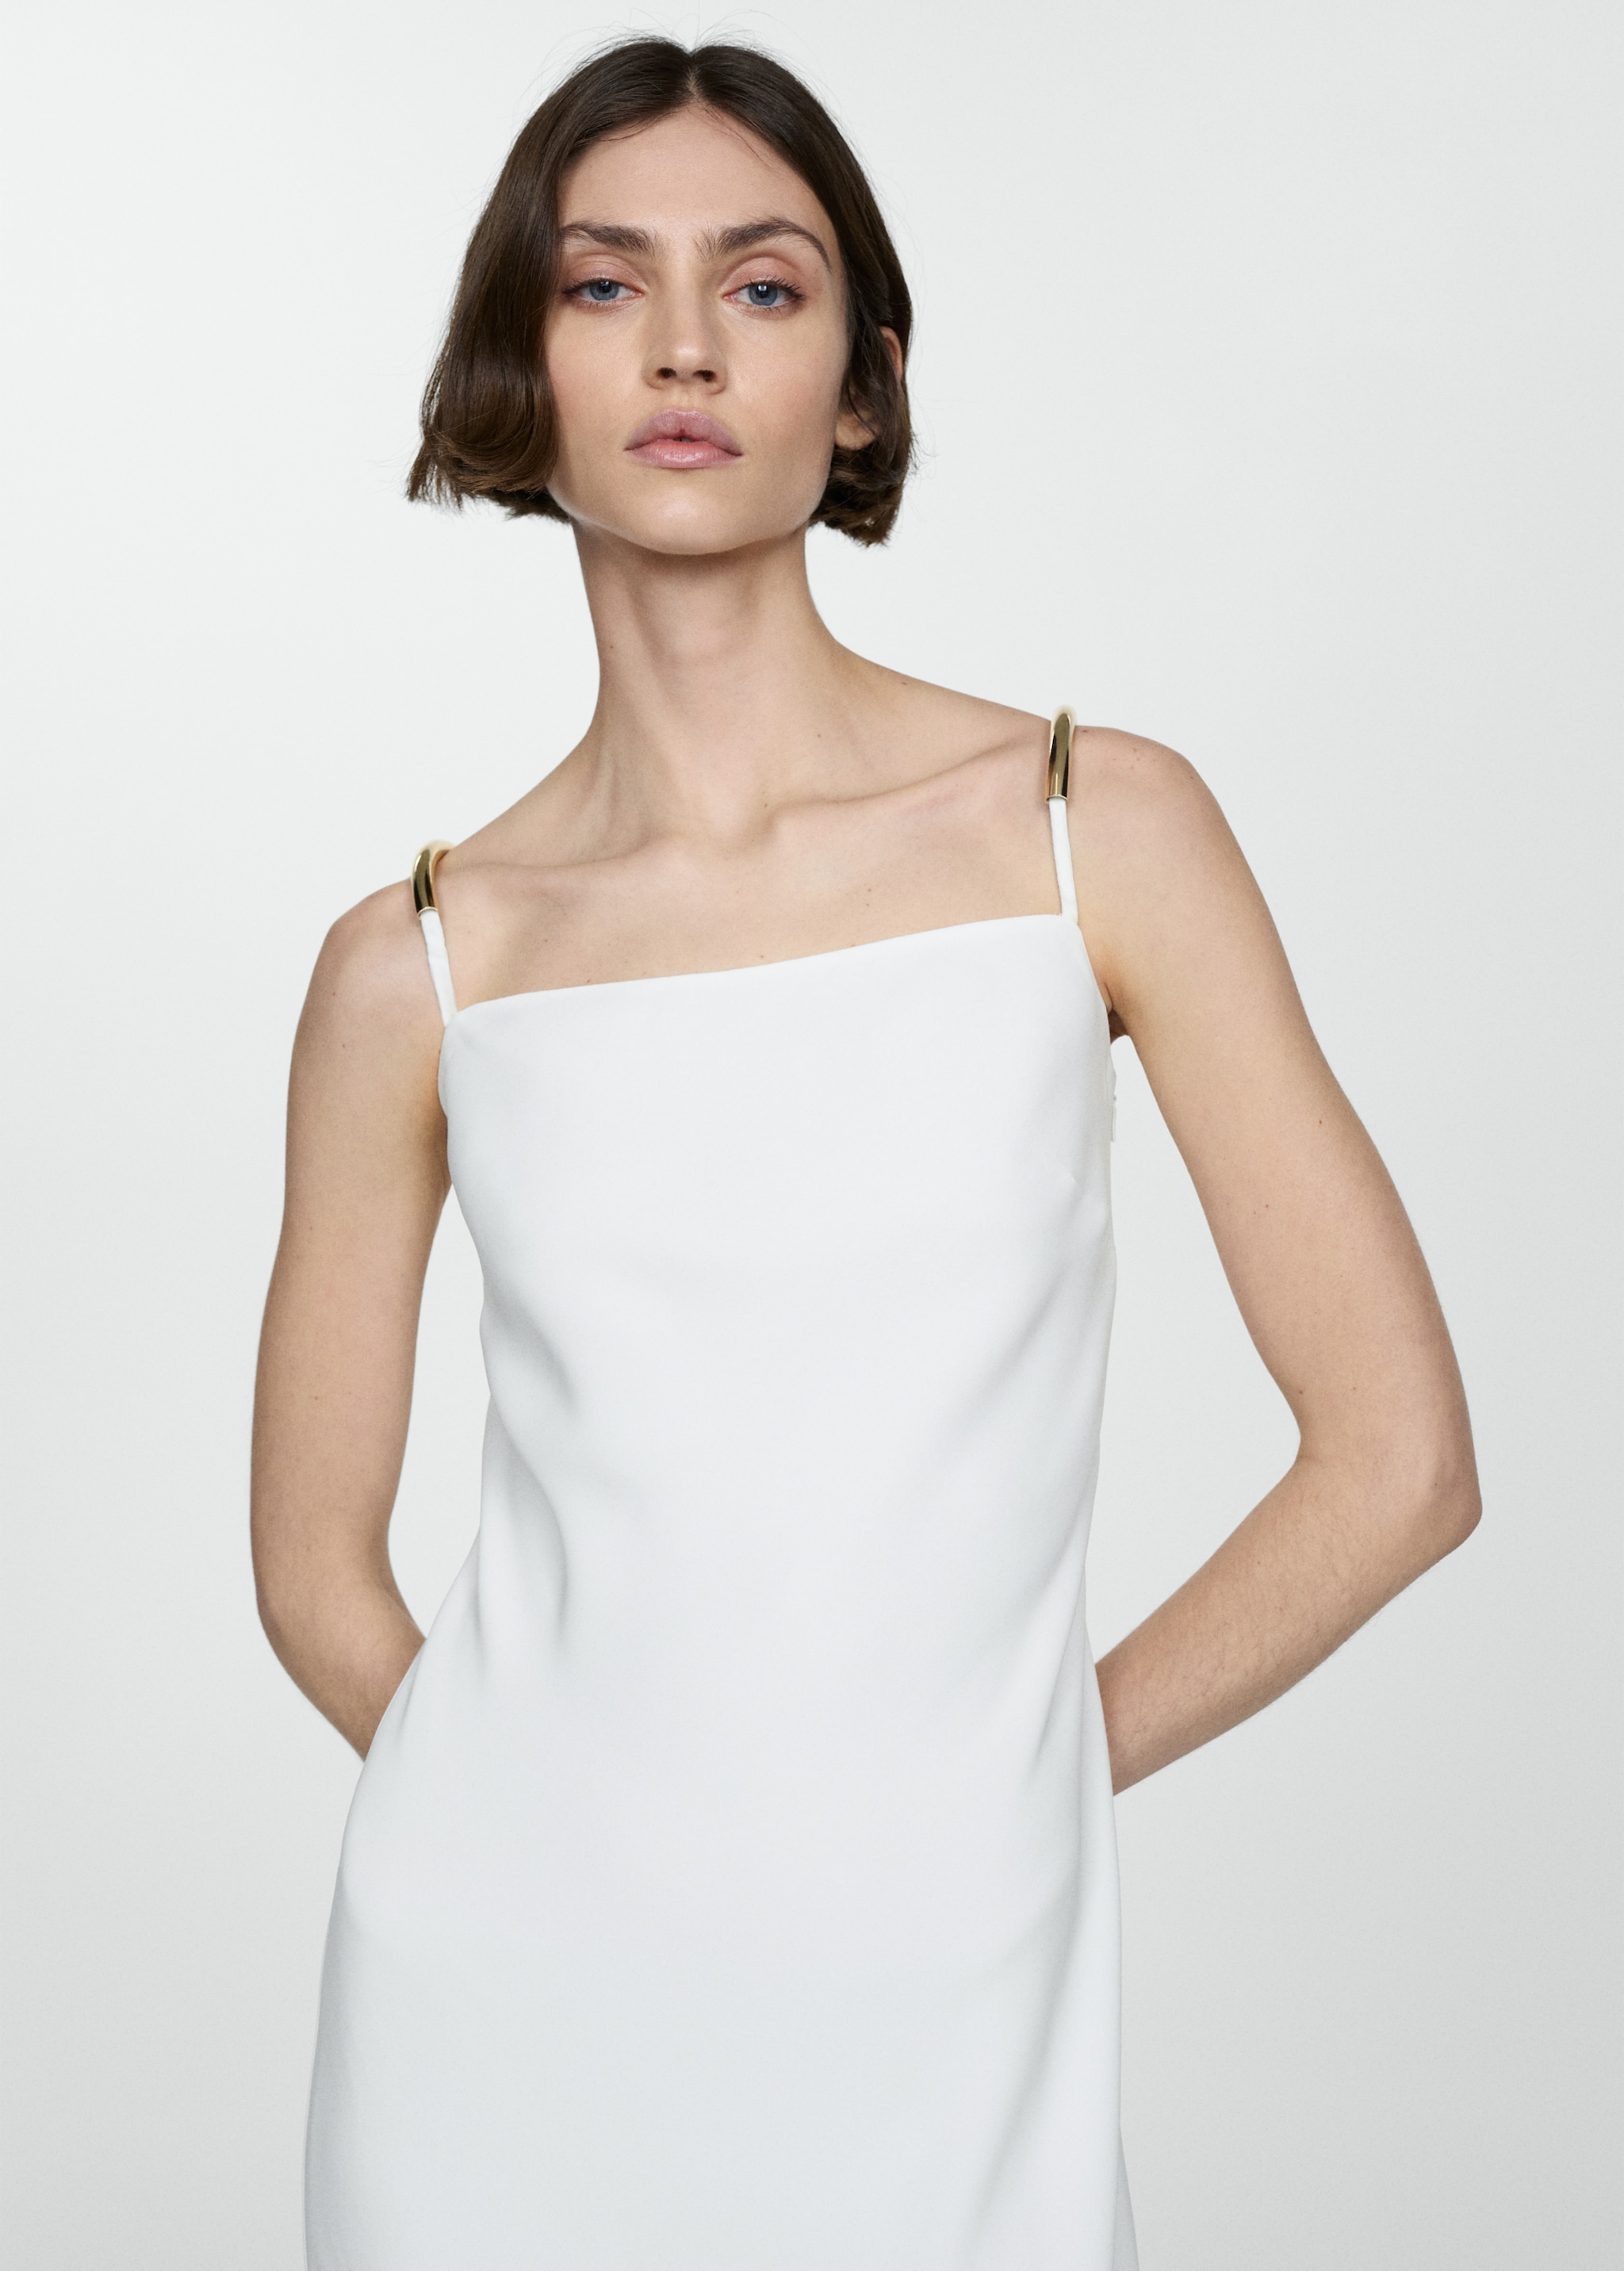 Strapless dress with metallic detail - Details of the article 1